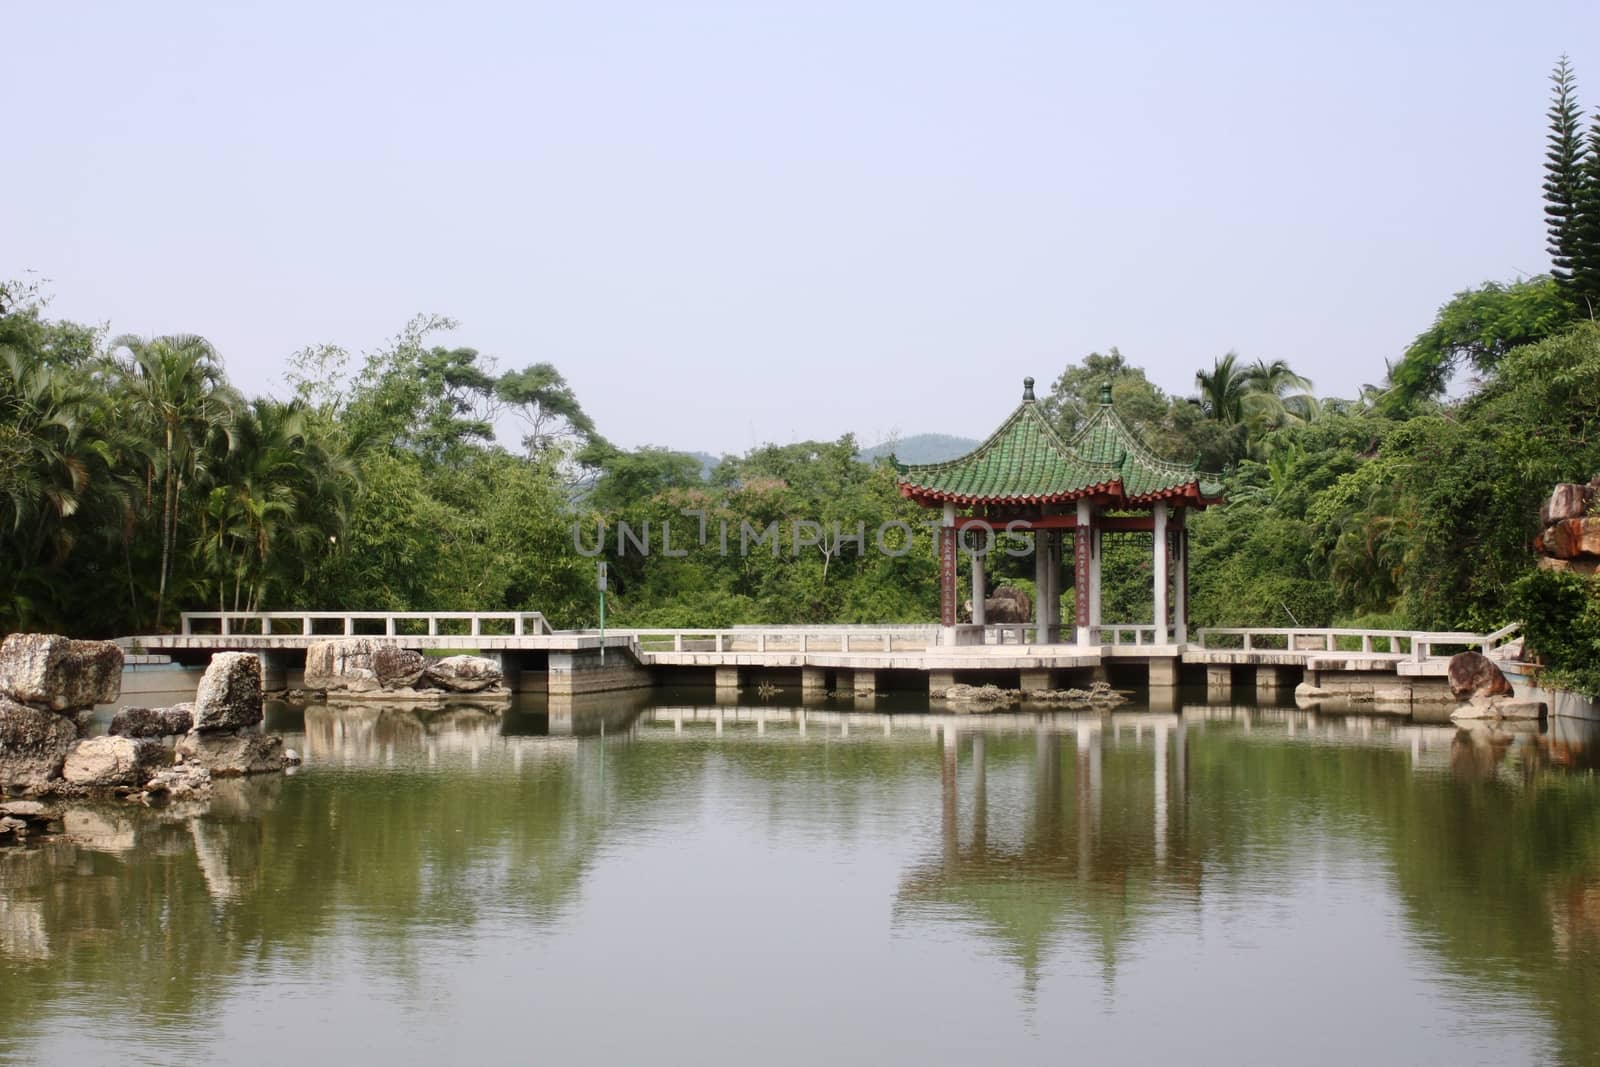 Buddhist temple in the religious center of Nanshan district on Hainan island in China